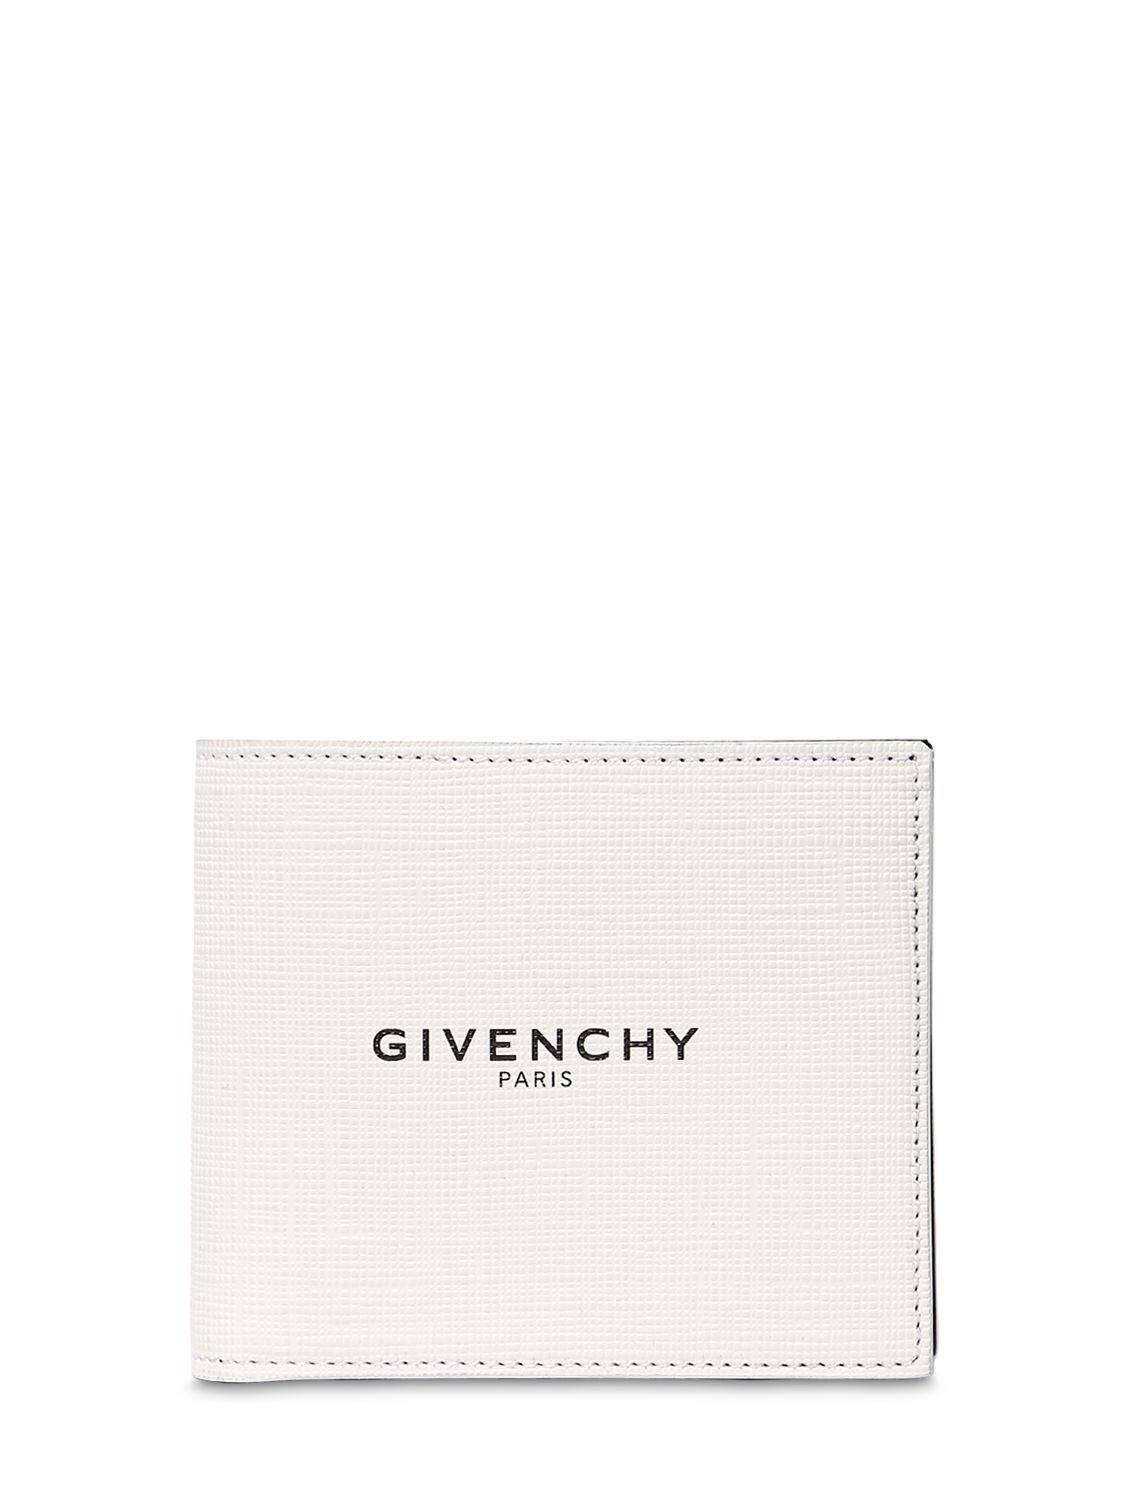 GIVENCHY GLOW-IN-THE-DARK CANVAS BILLFOLD WALLET,70ILBG010-MTAW0